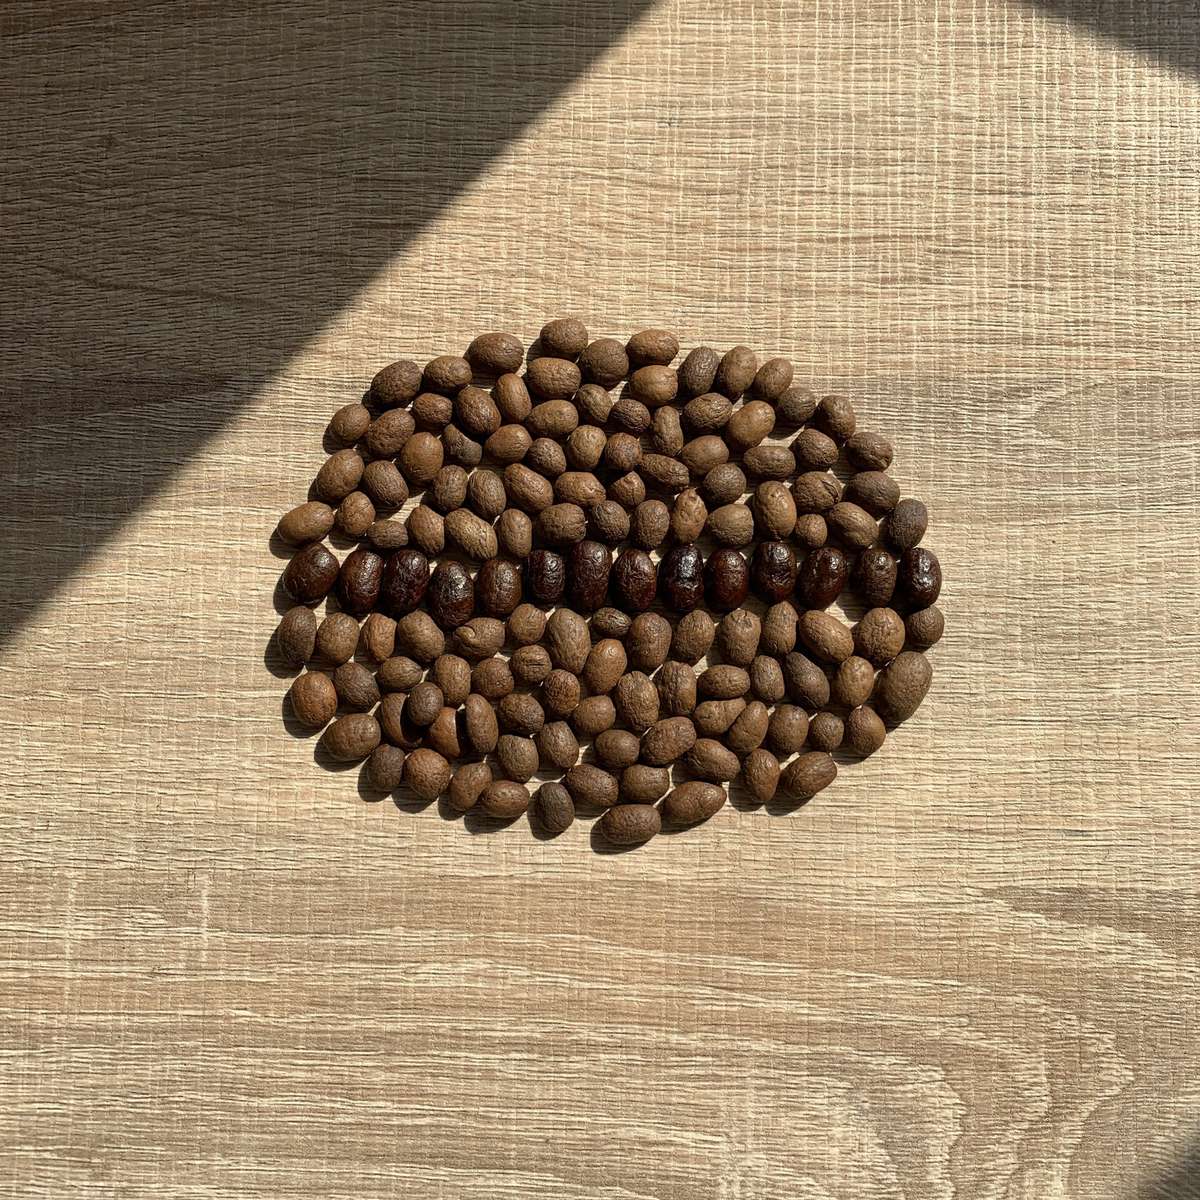 A coffee bean image made of coffee beans